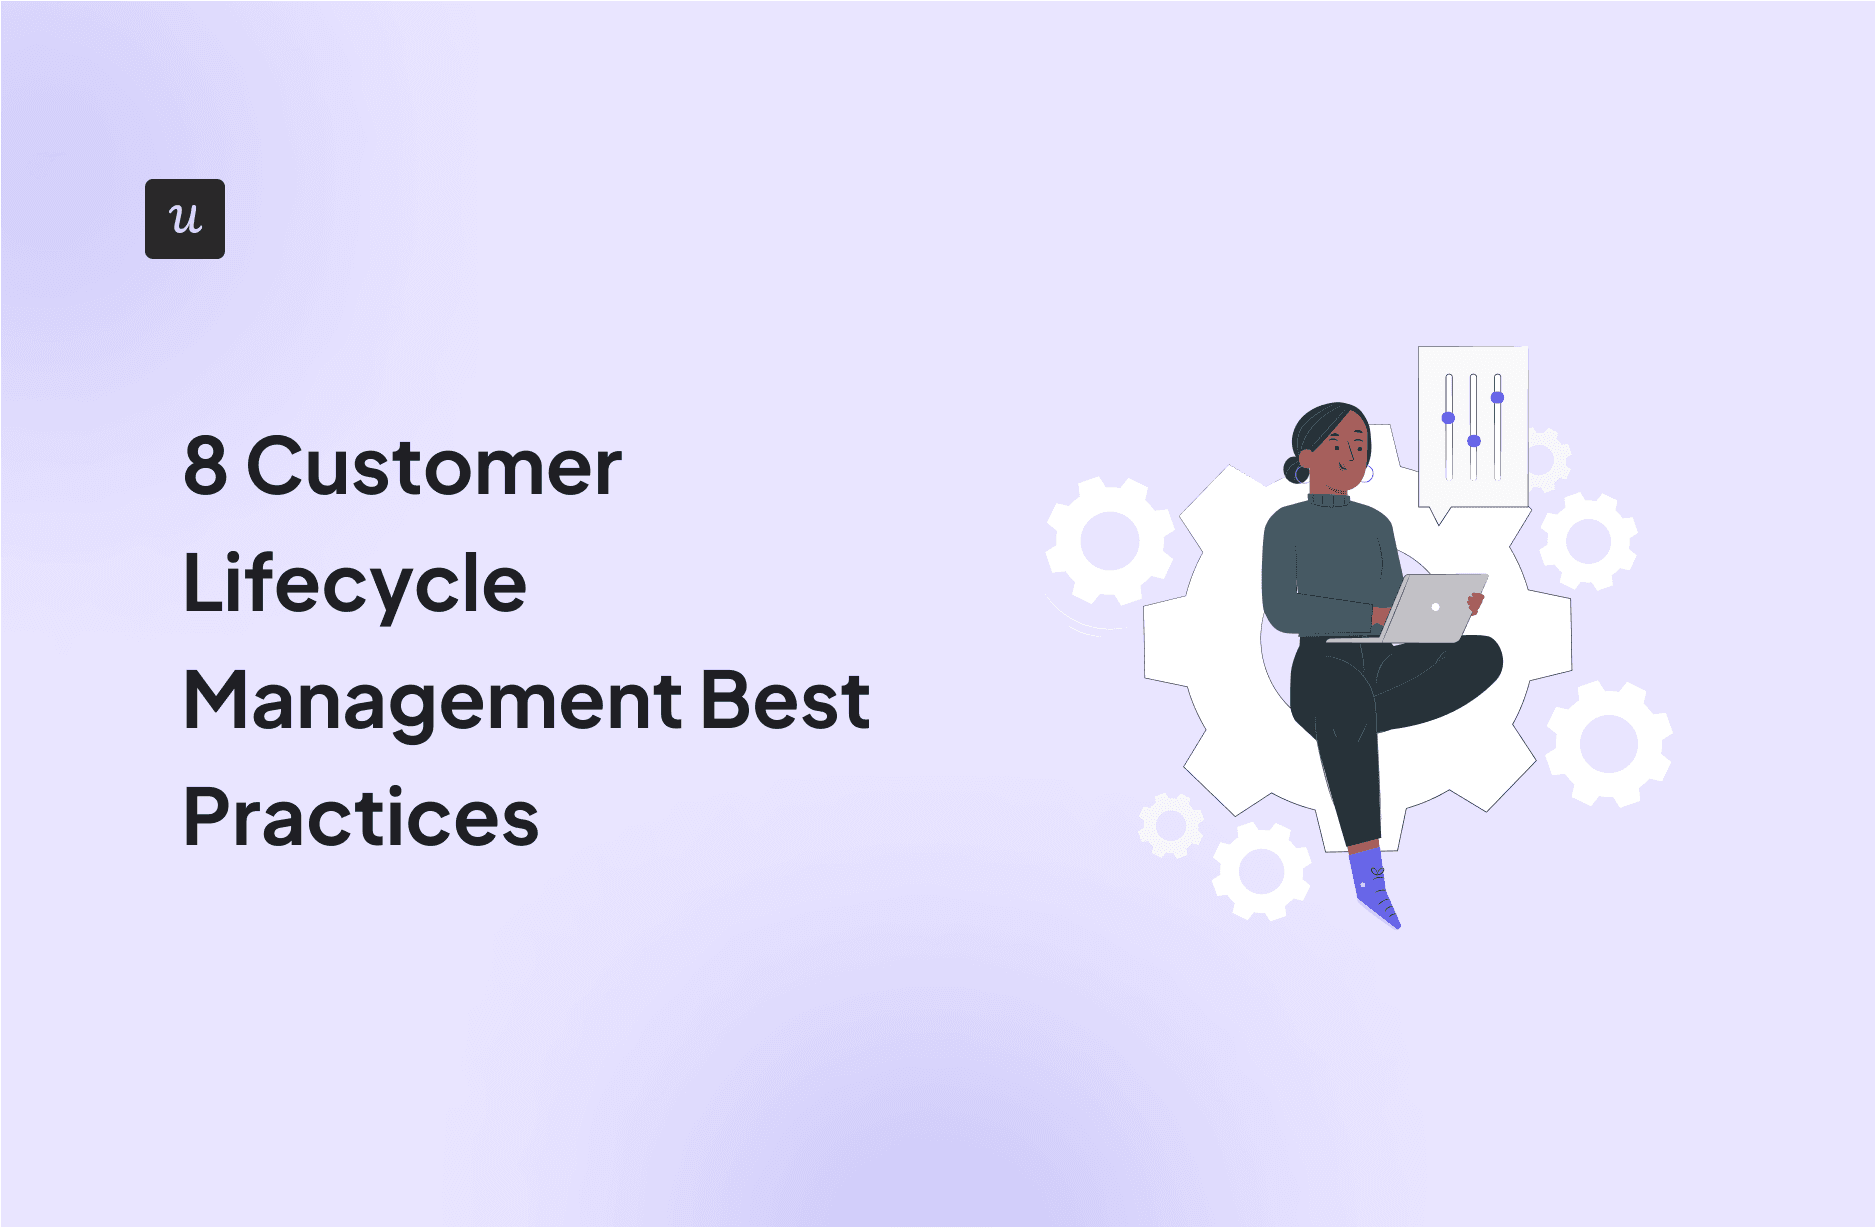 8 Customer Lifecycle Management Best Practices cover